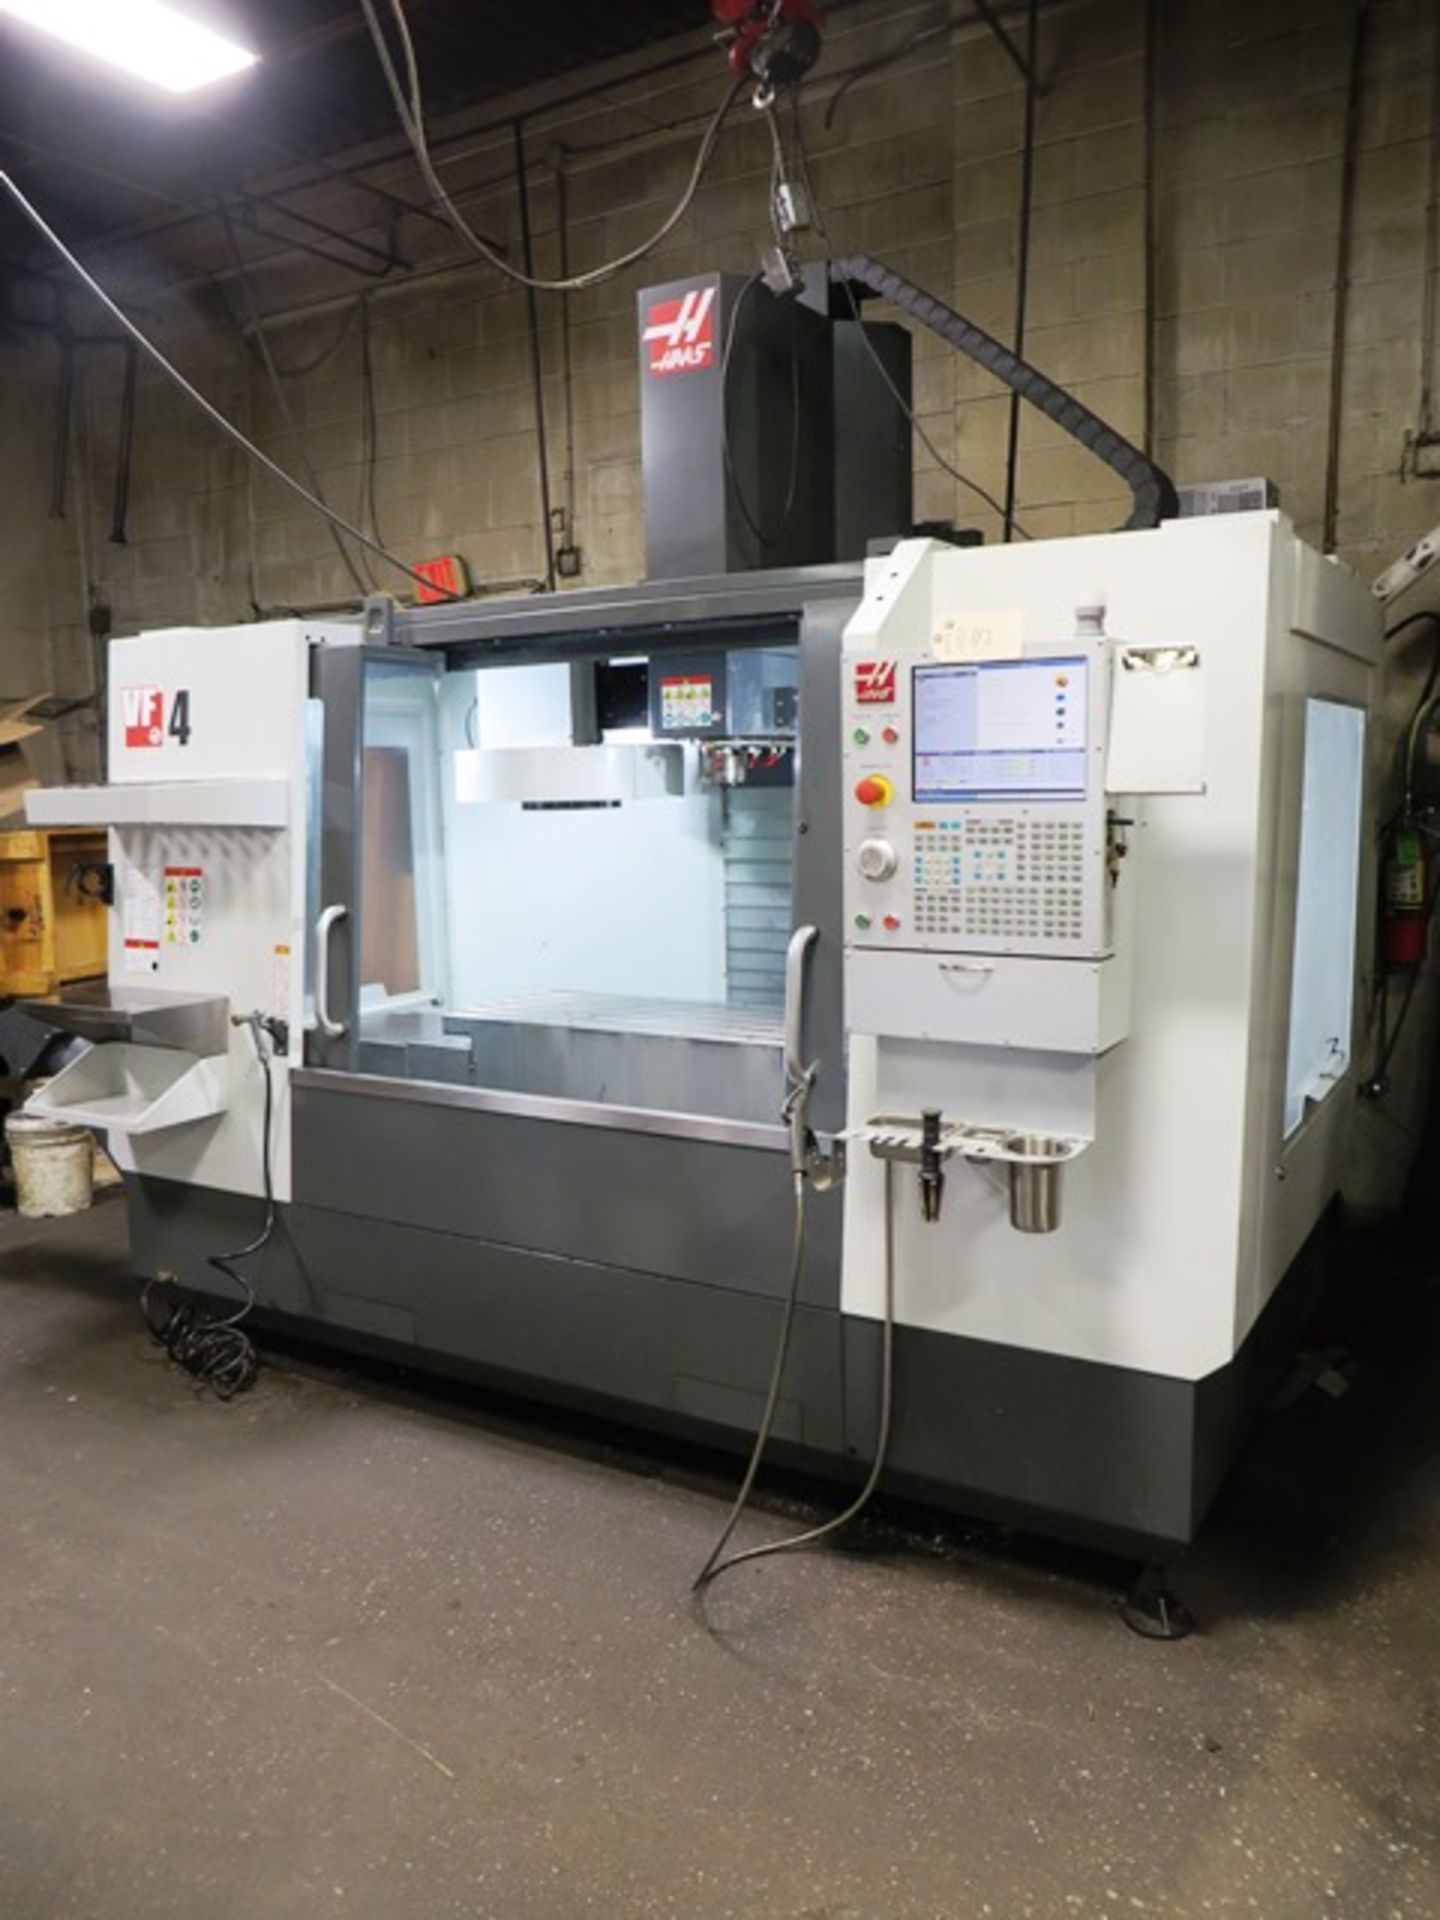 Haas VF-4 3-Axis CNC Vertical Machining Center - Image 3 of 7